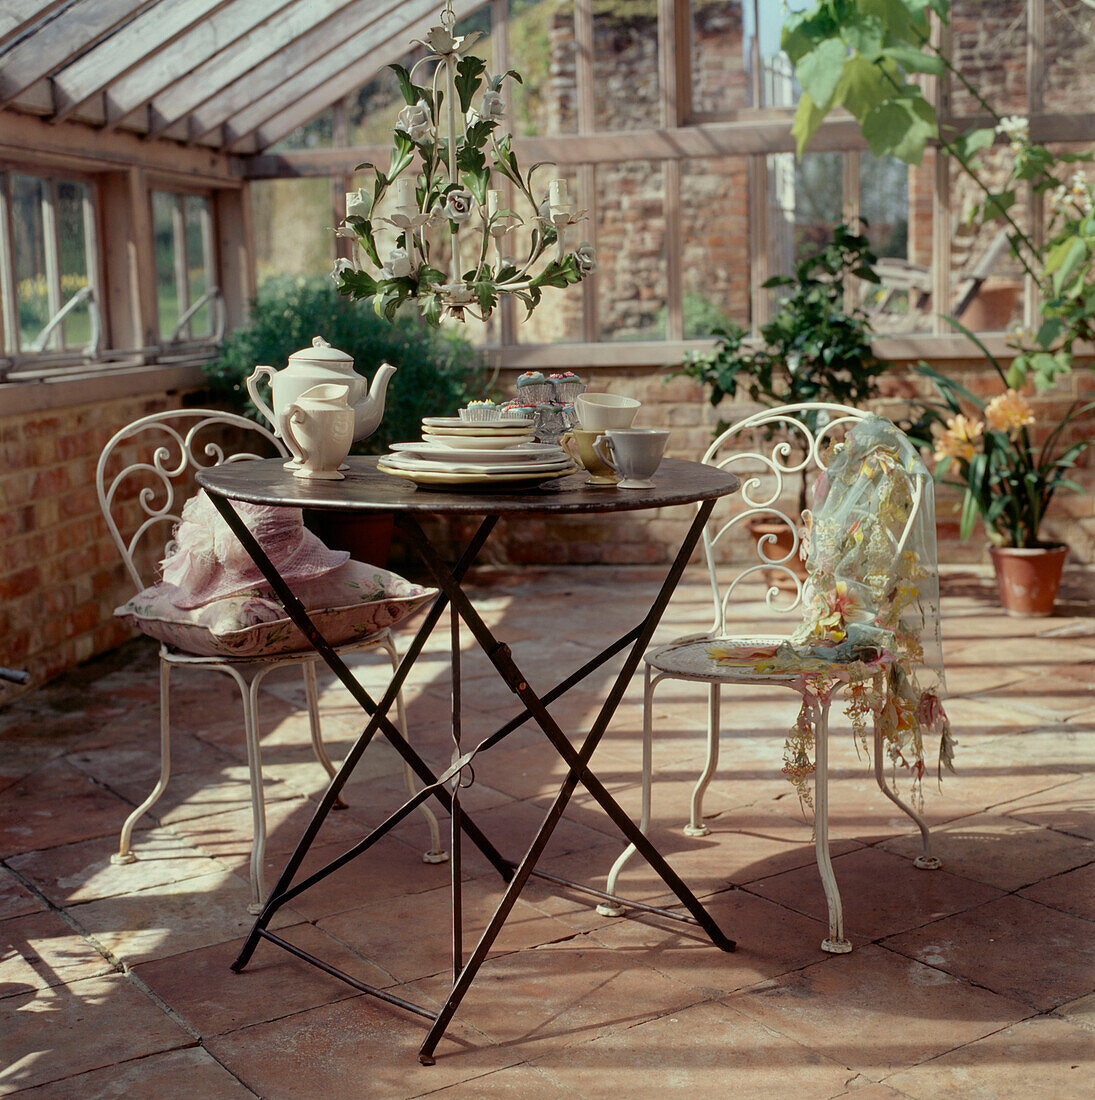 Metal garden table and chairs in a period glass conservatory with tableware